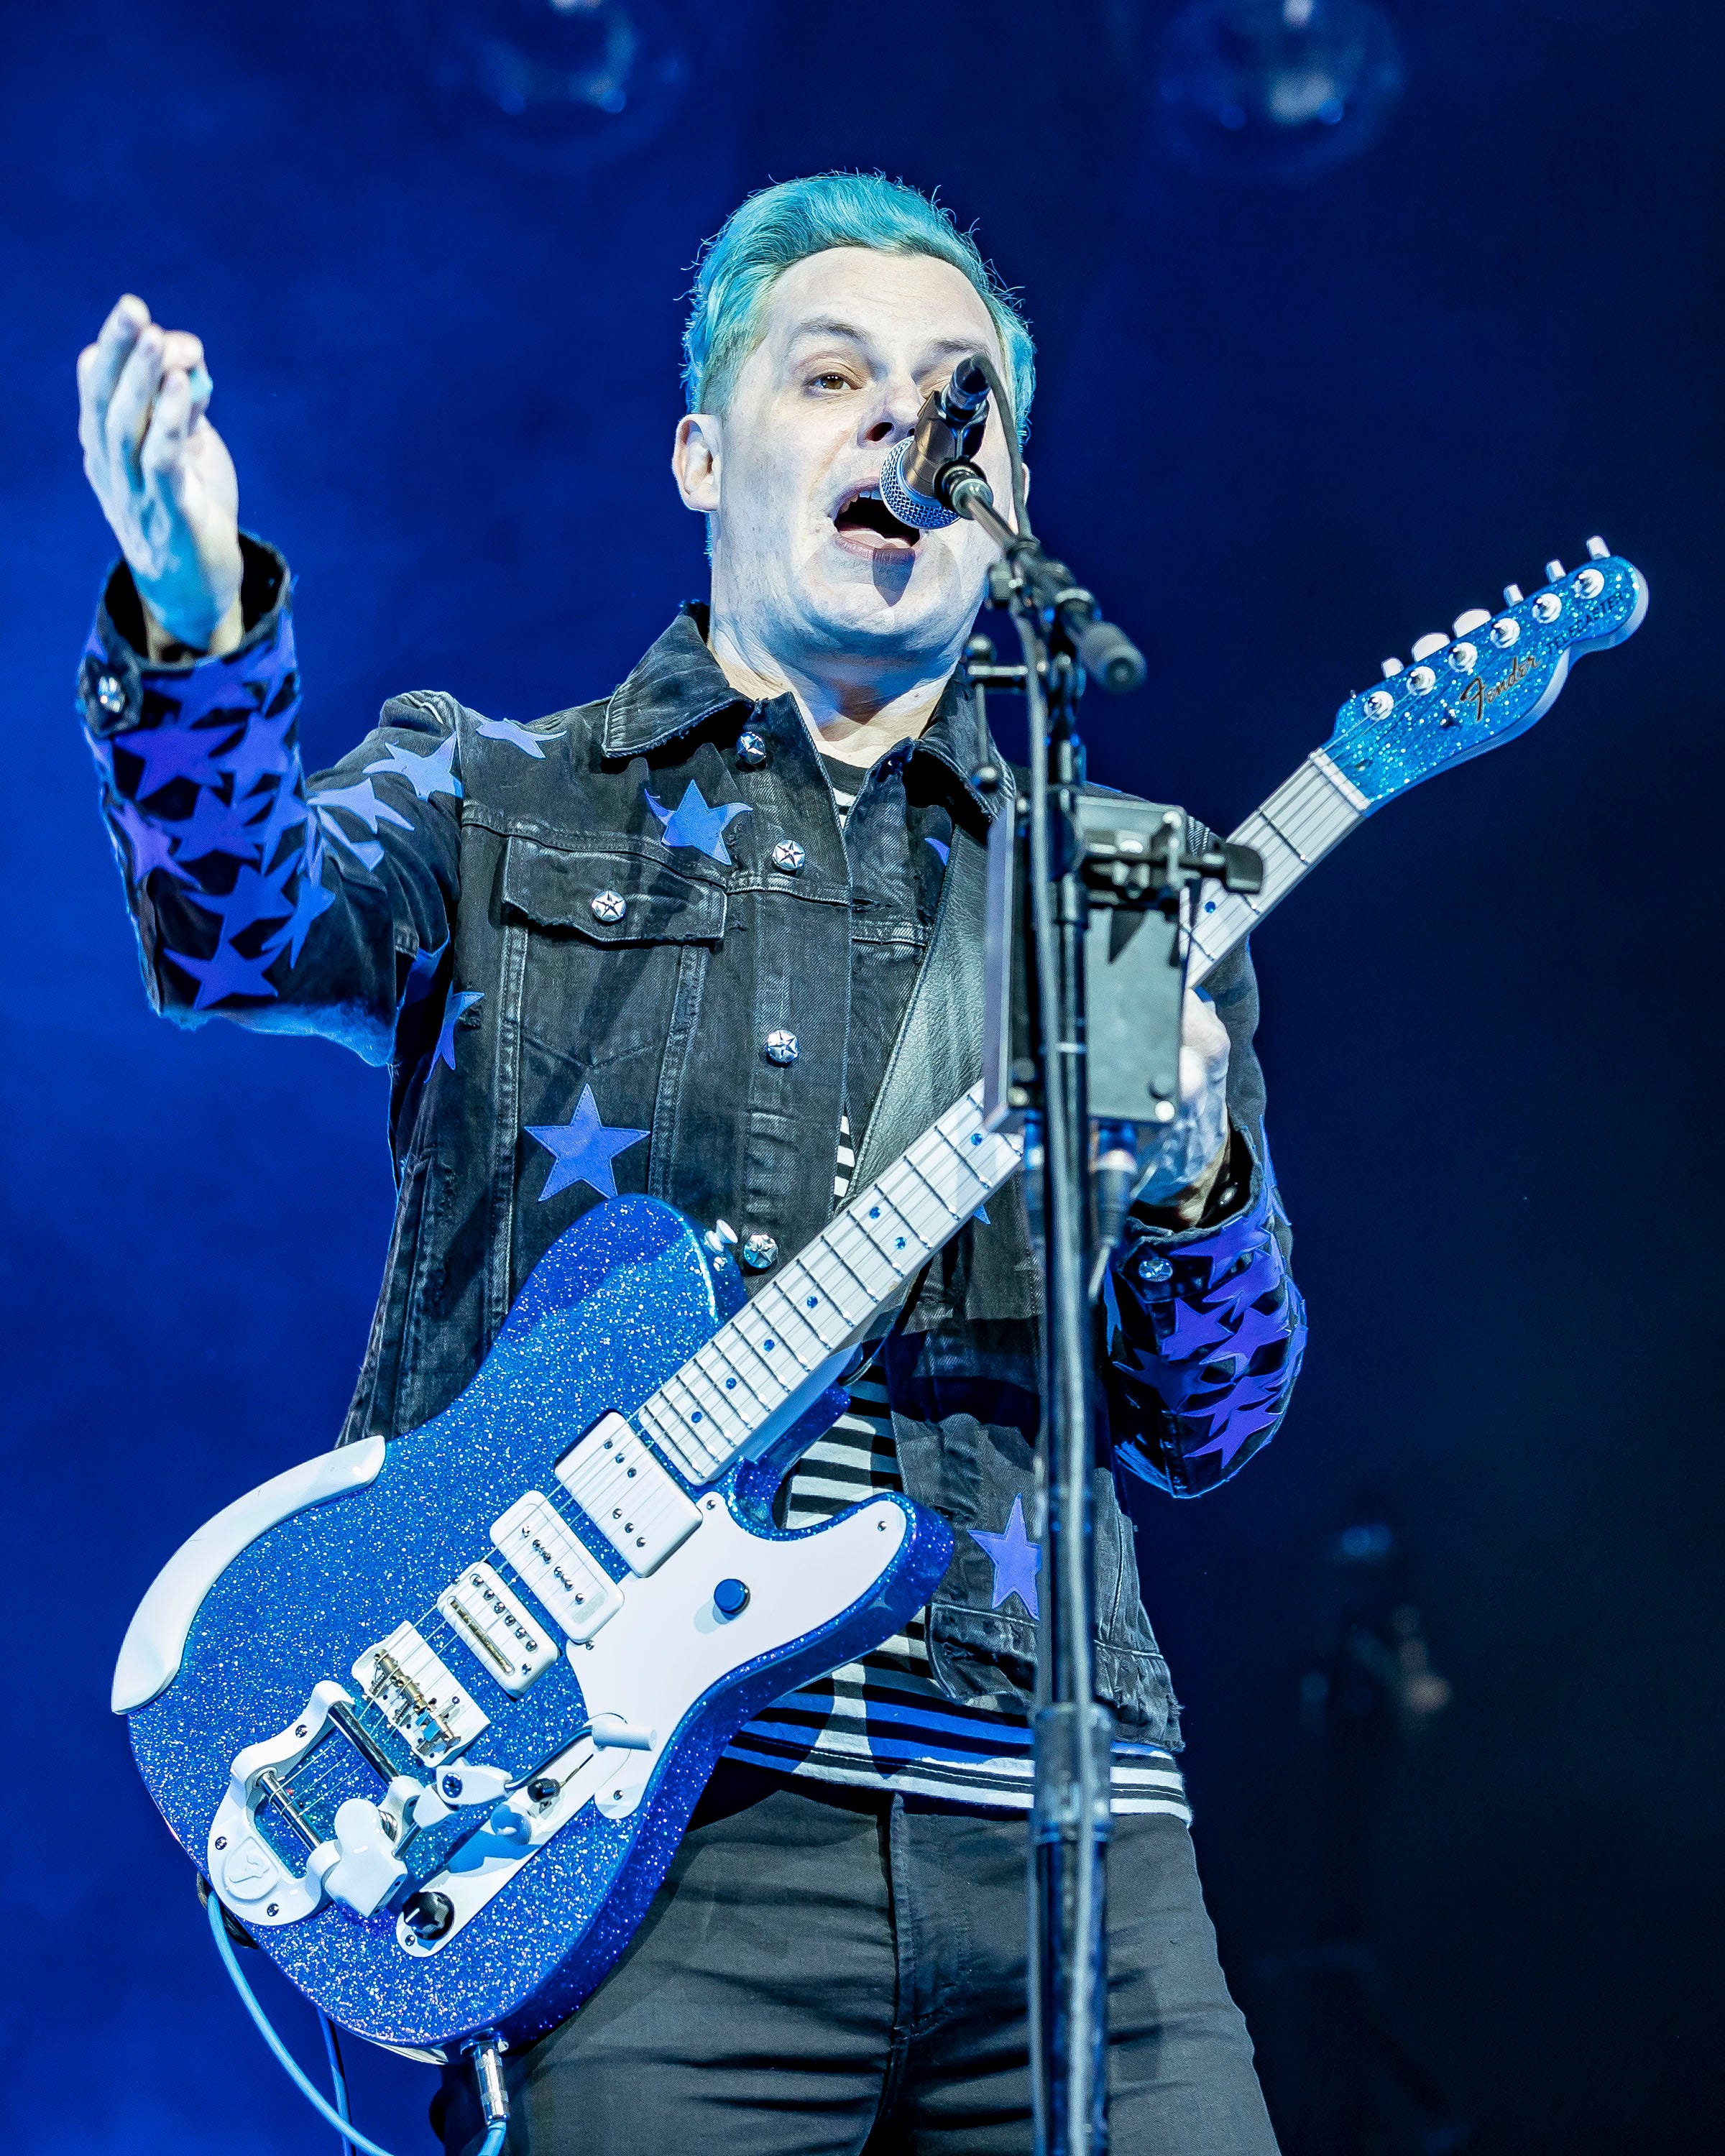 Jack White performs during the bands Supply Chains Issues Tour at the Masonic Temple on April 8, 2022 in Detroit, Michigan.